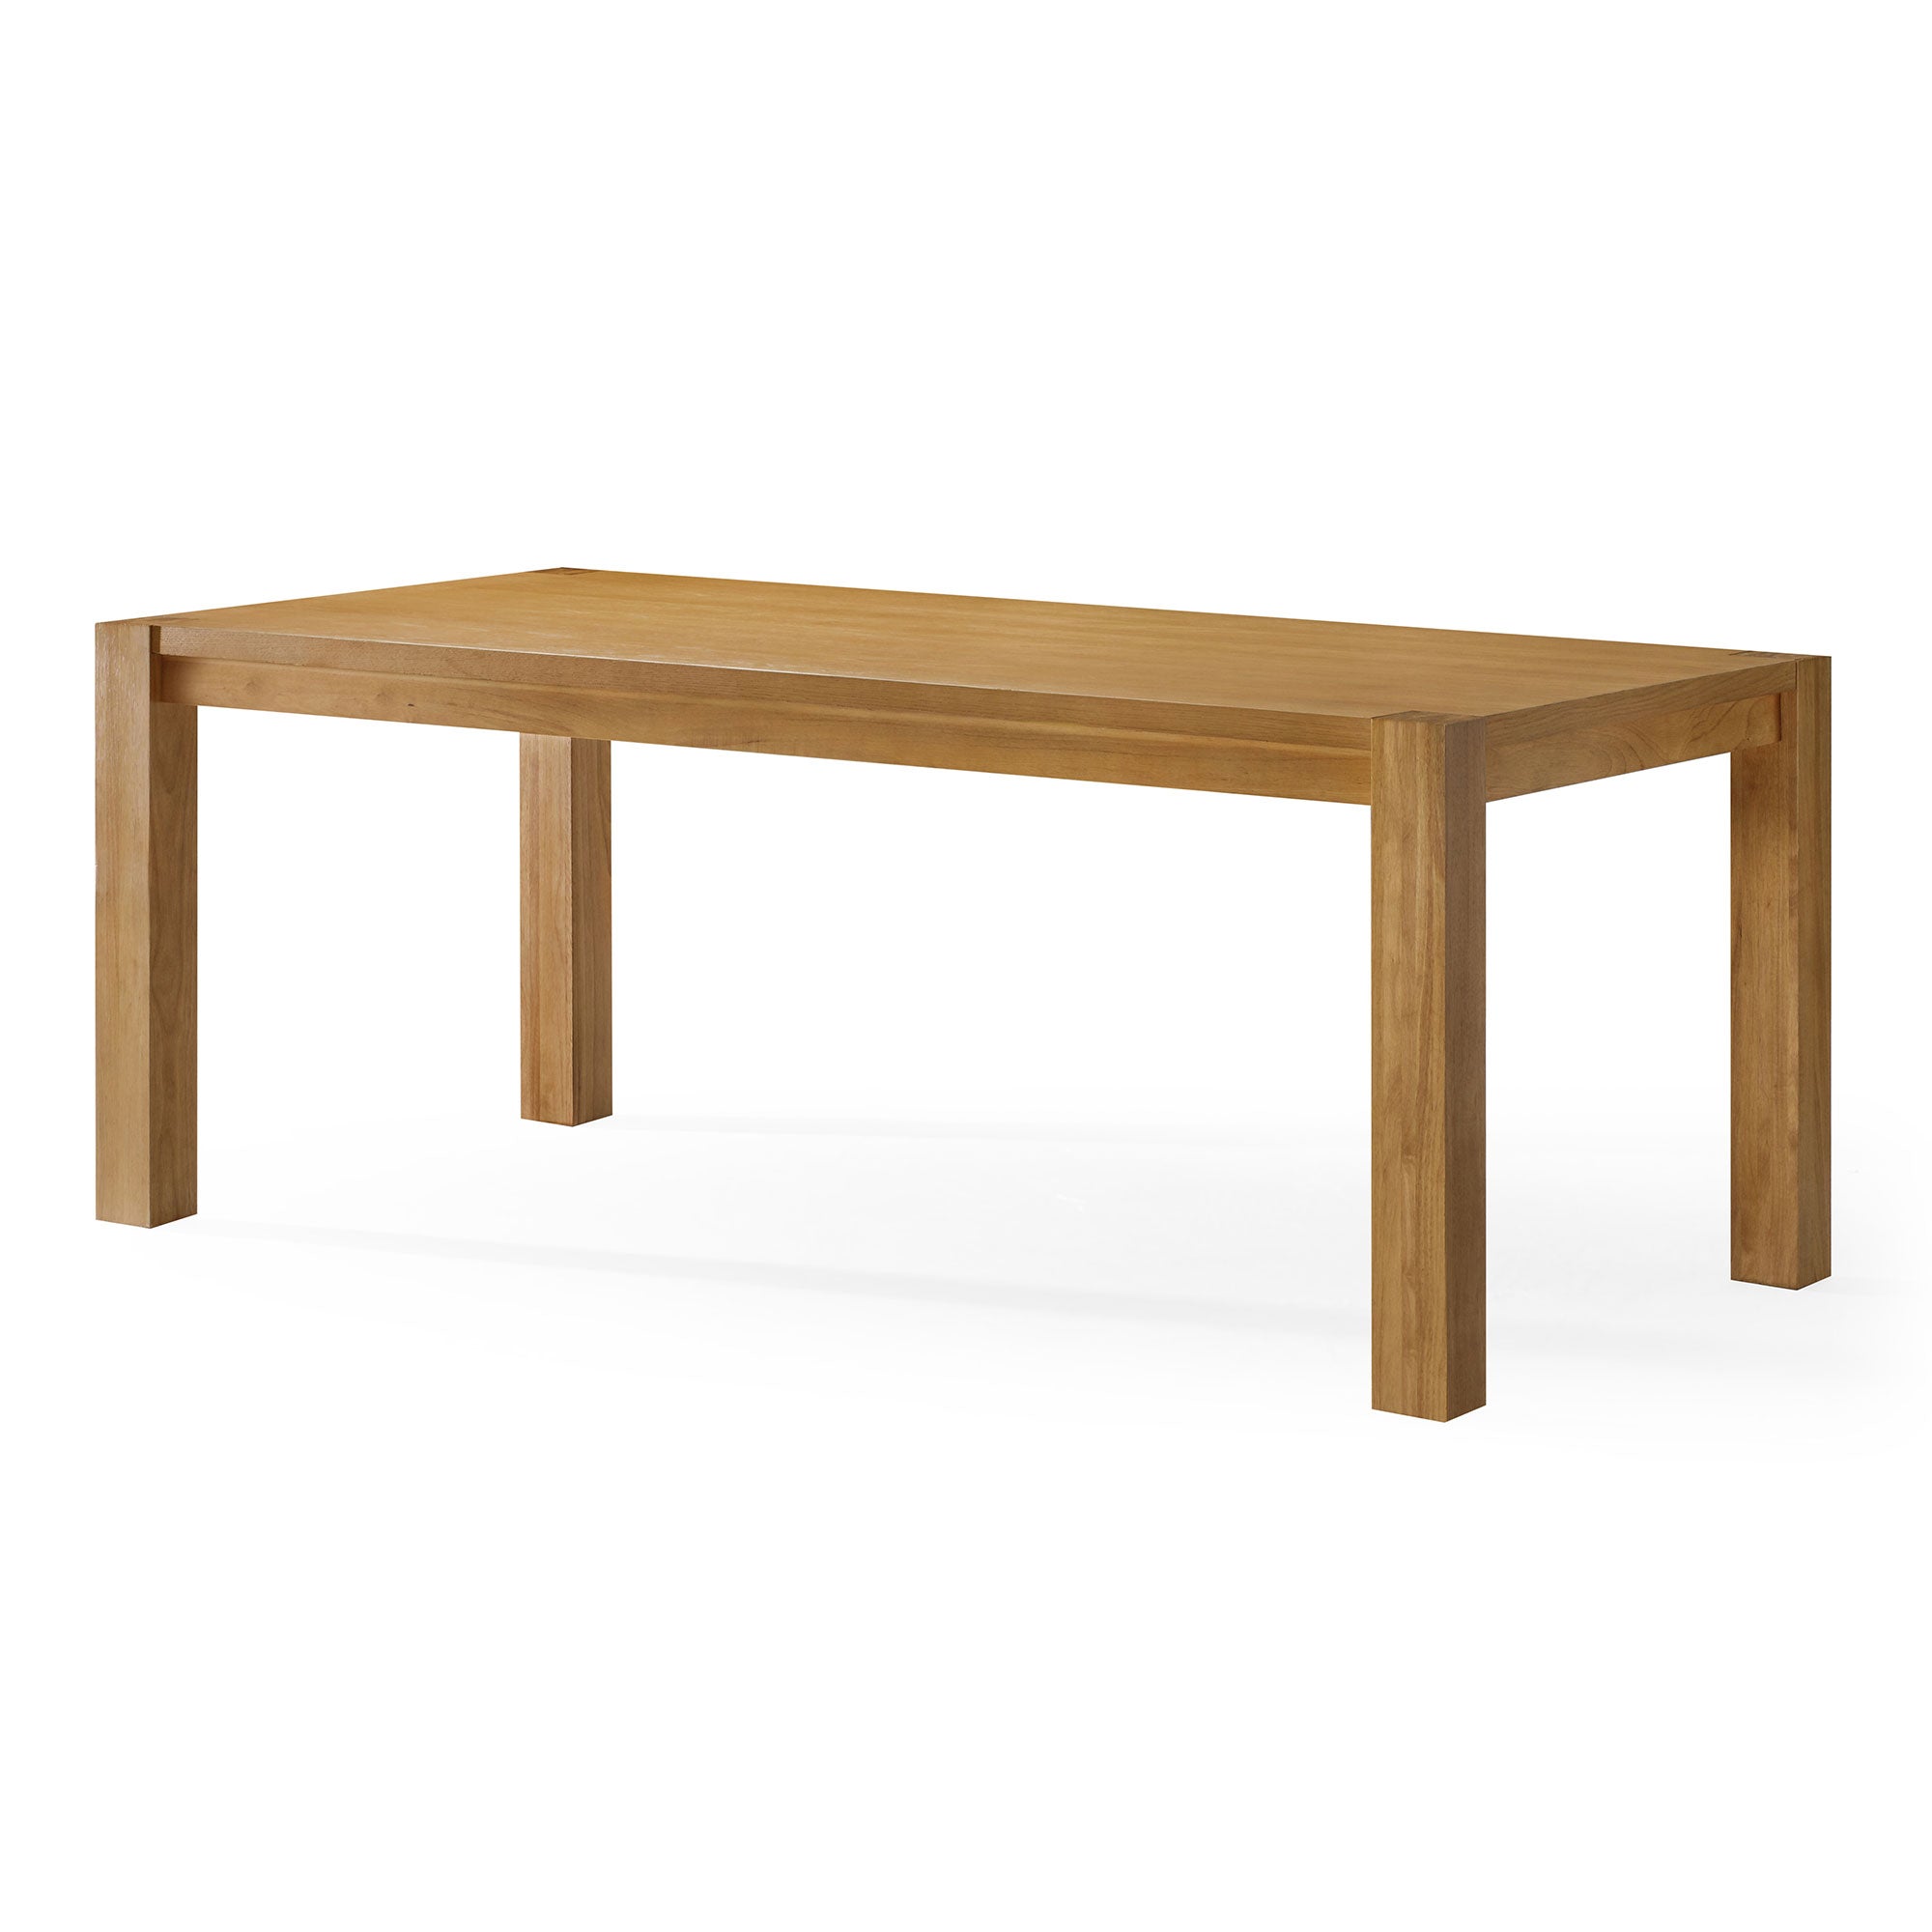 Cleo Contemporary Wooden Dining Table in Refined Natural Finish in Dining Furniture by Maven Lane